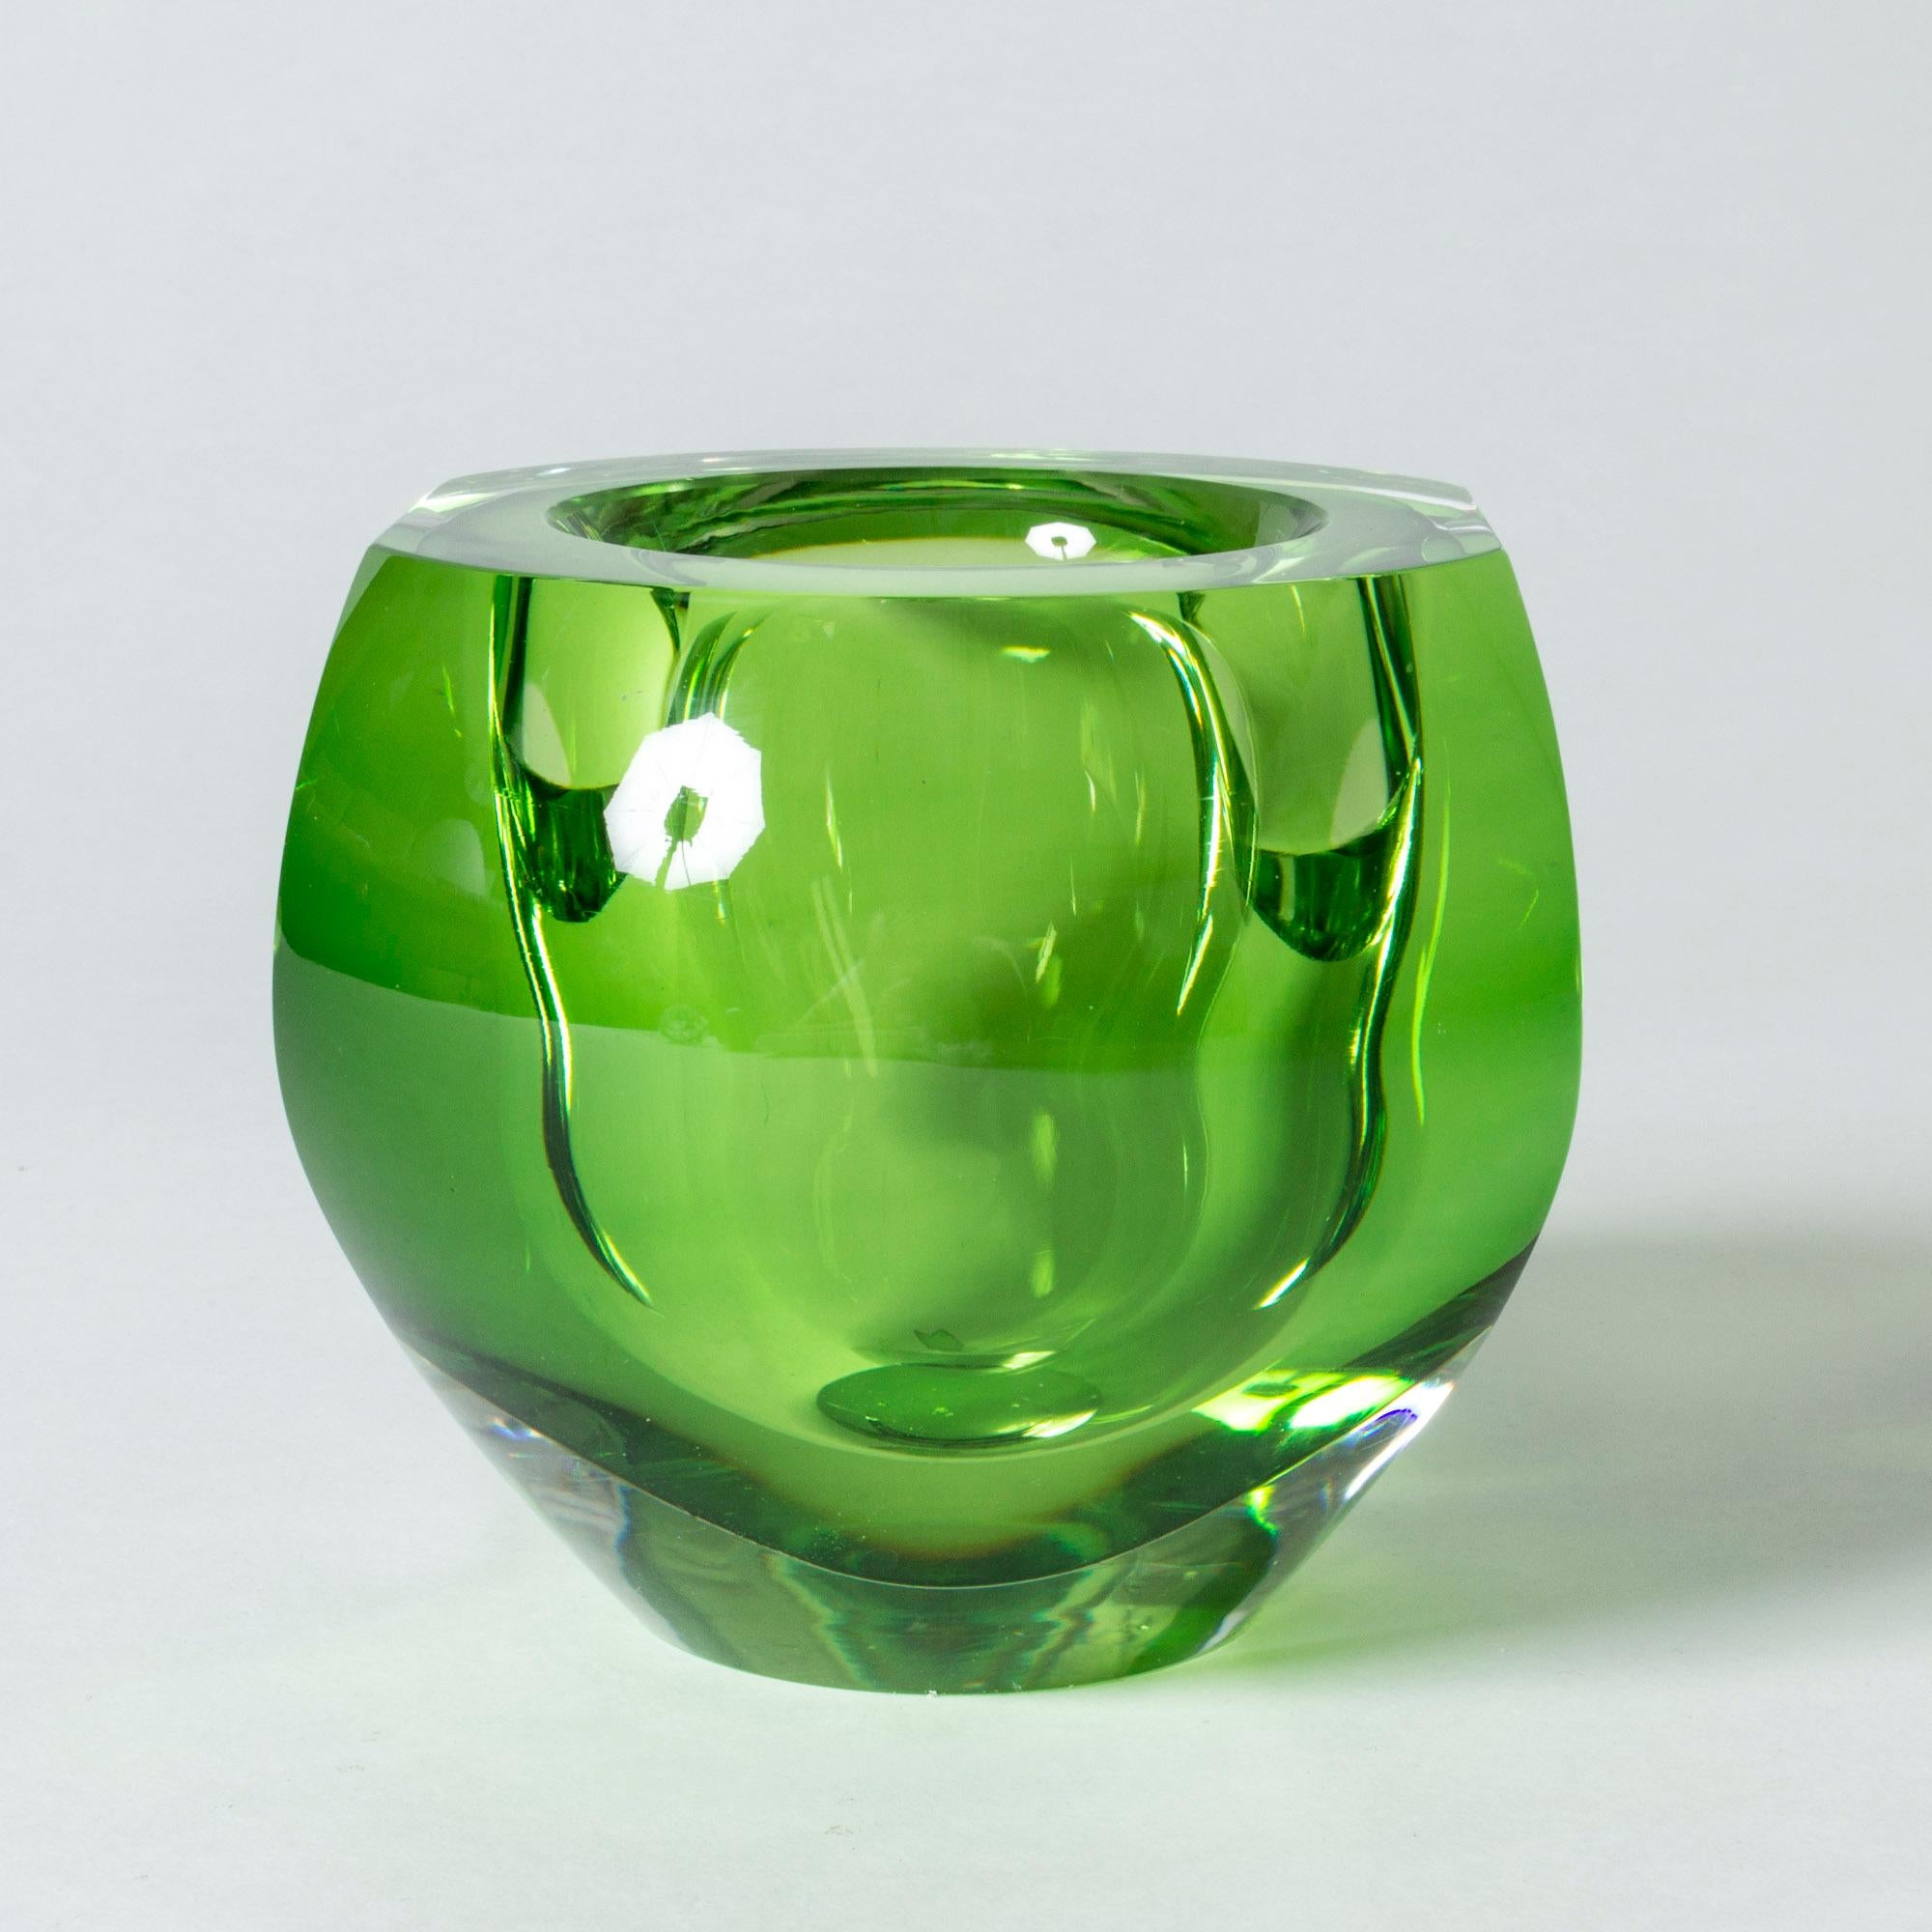 Crystal glass bowl by Mona Morales-Schildt, in heavy quality and a striking, poisonous green color. Dramatic design with a play of light in the thick glass.